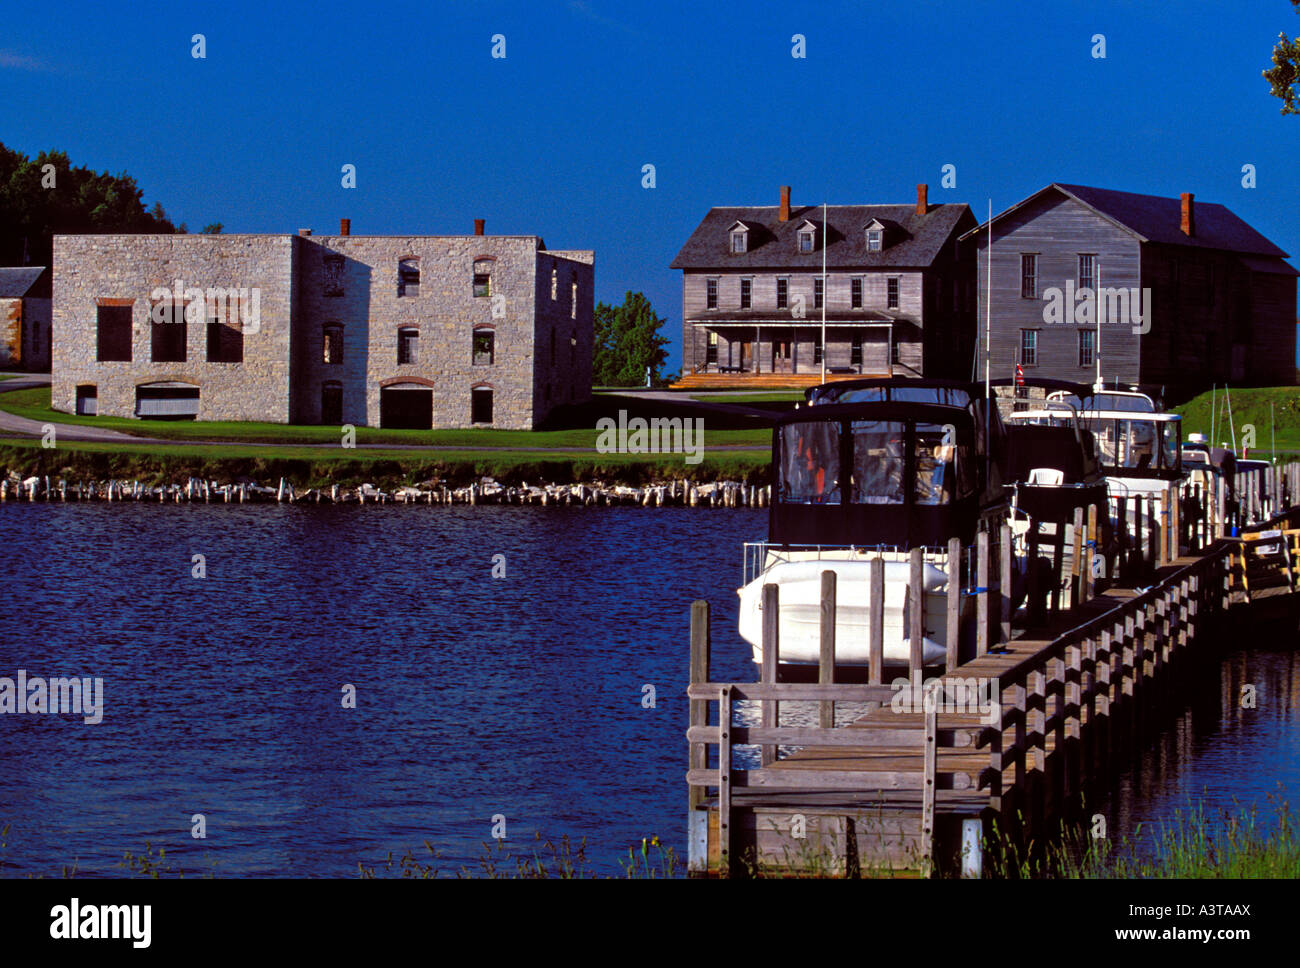 BOATS DOCK IN SNAIL SHELL HARBOR NEAR NINETEENTH CENTURY BUILDINGS AT FAYETTE STATE HISTORIC PARK ON THE GARDEN PENINSULA Stock Photo